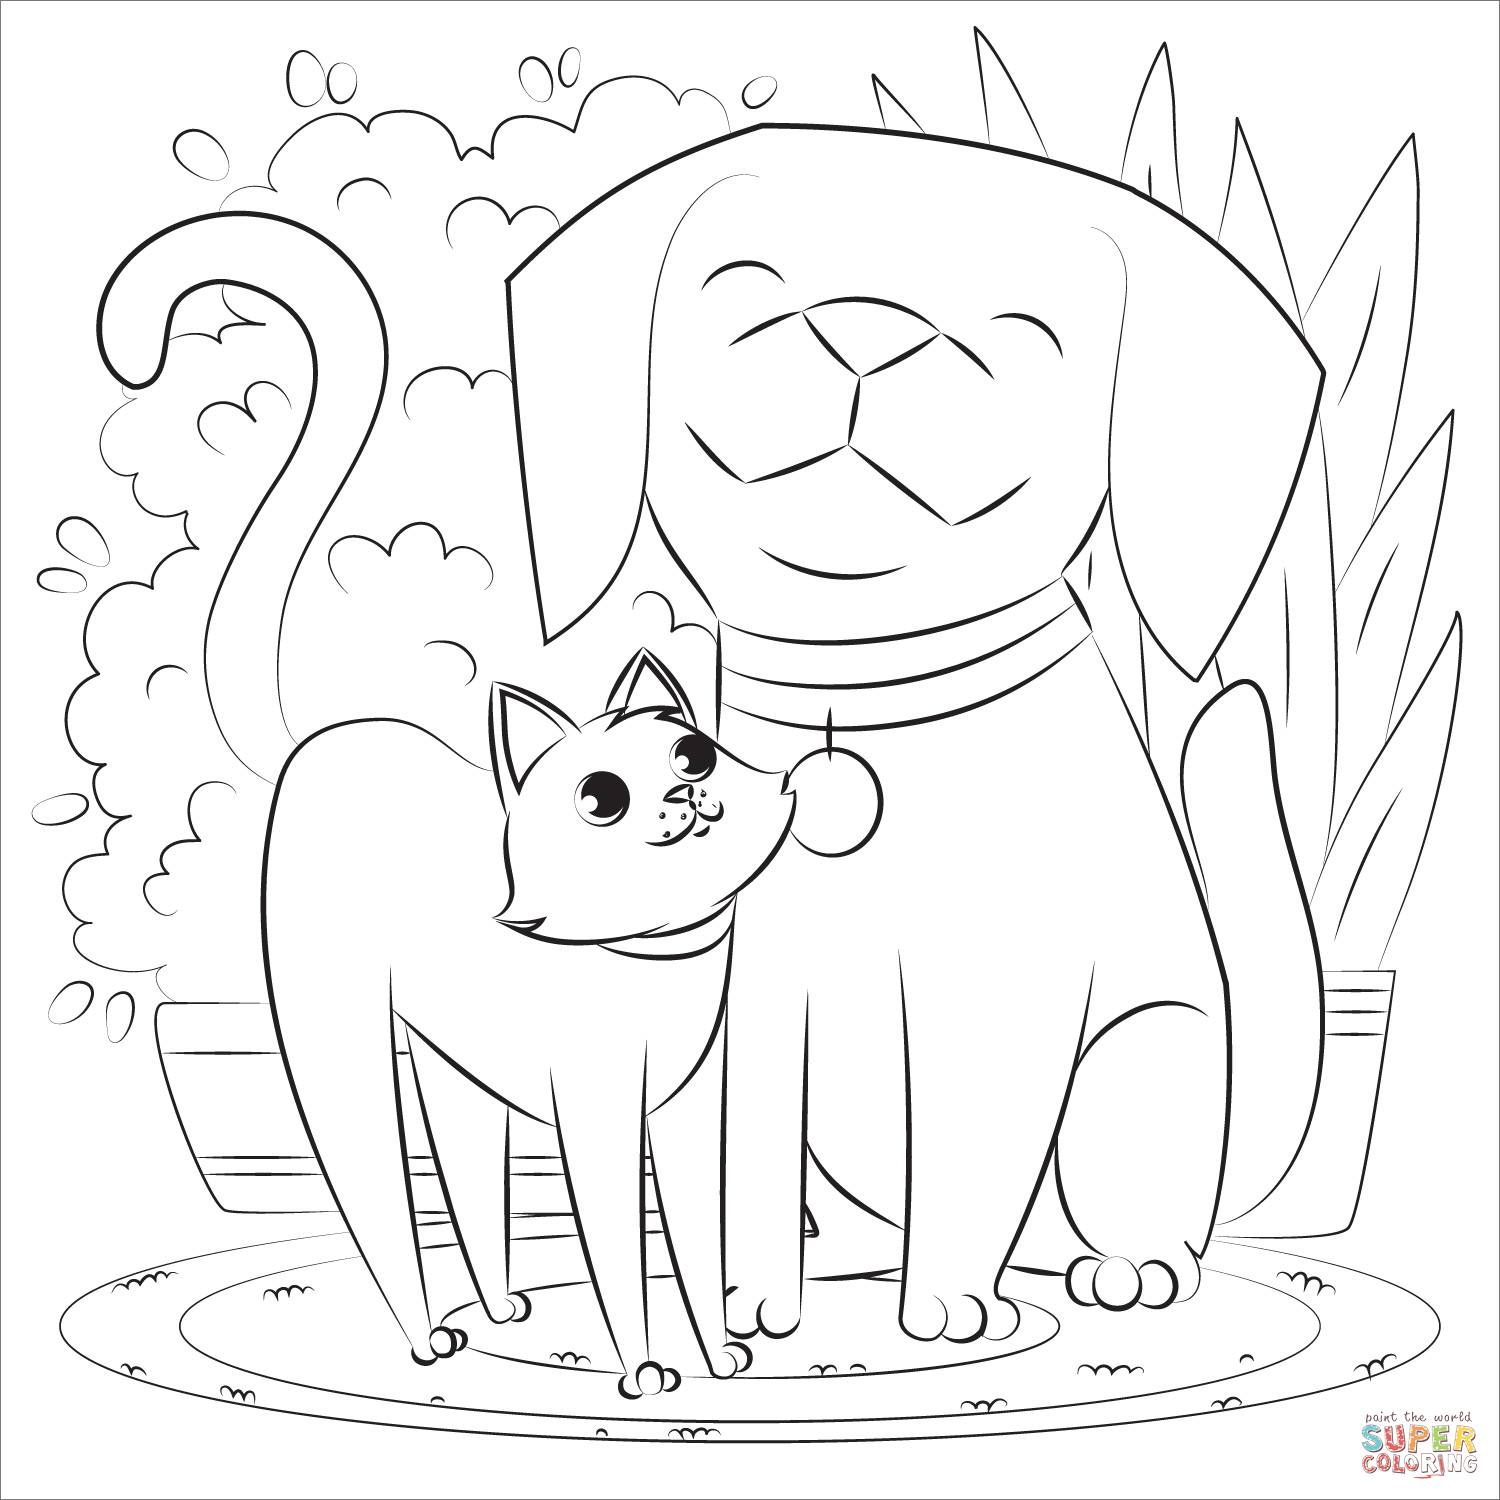 Dog and Cat coloring page | Free Printable Coloring Pages